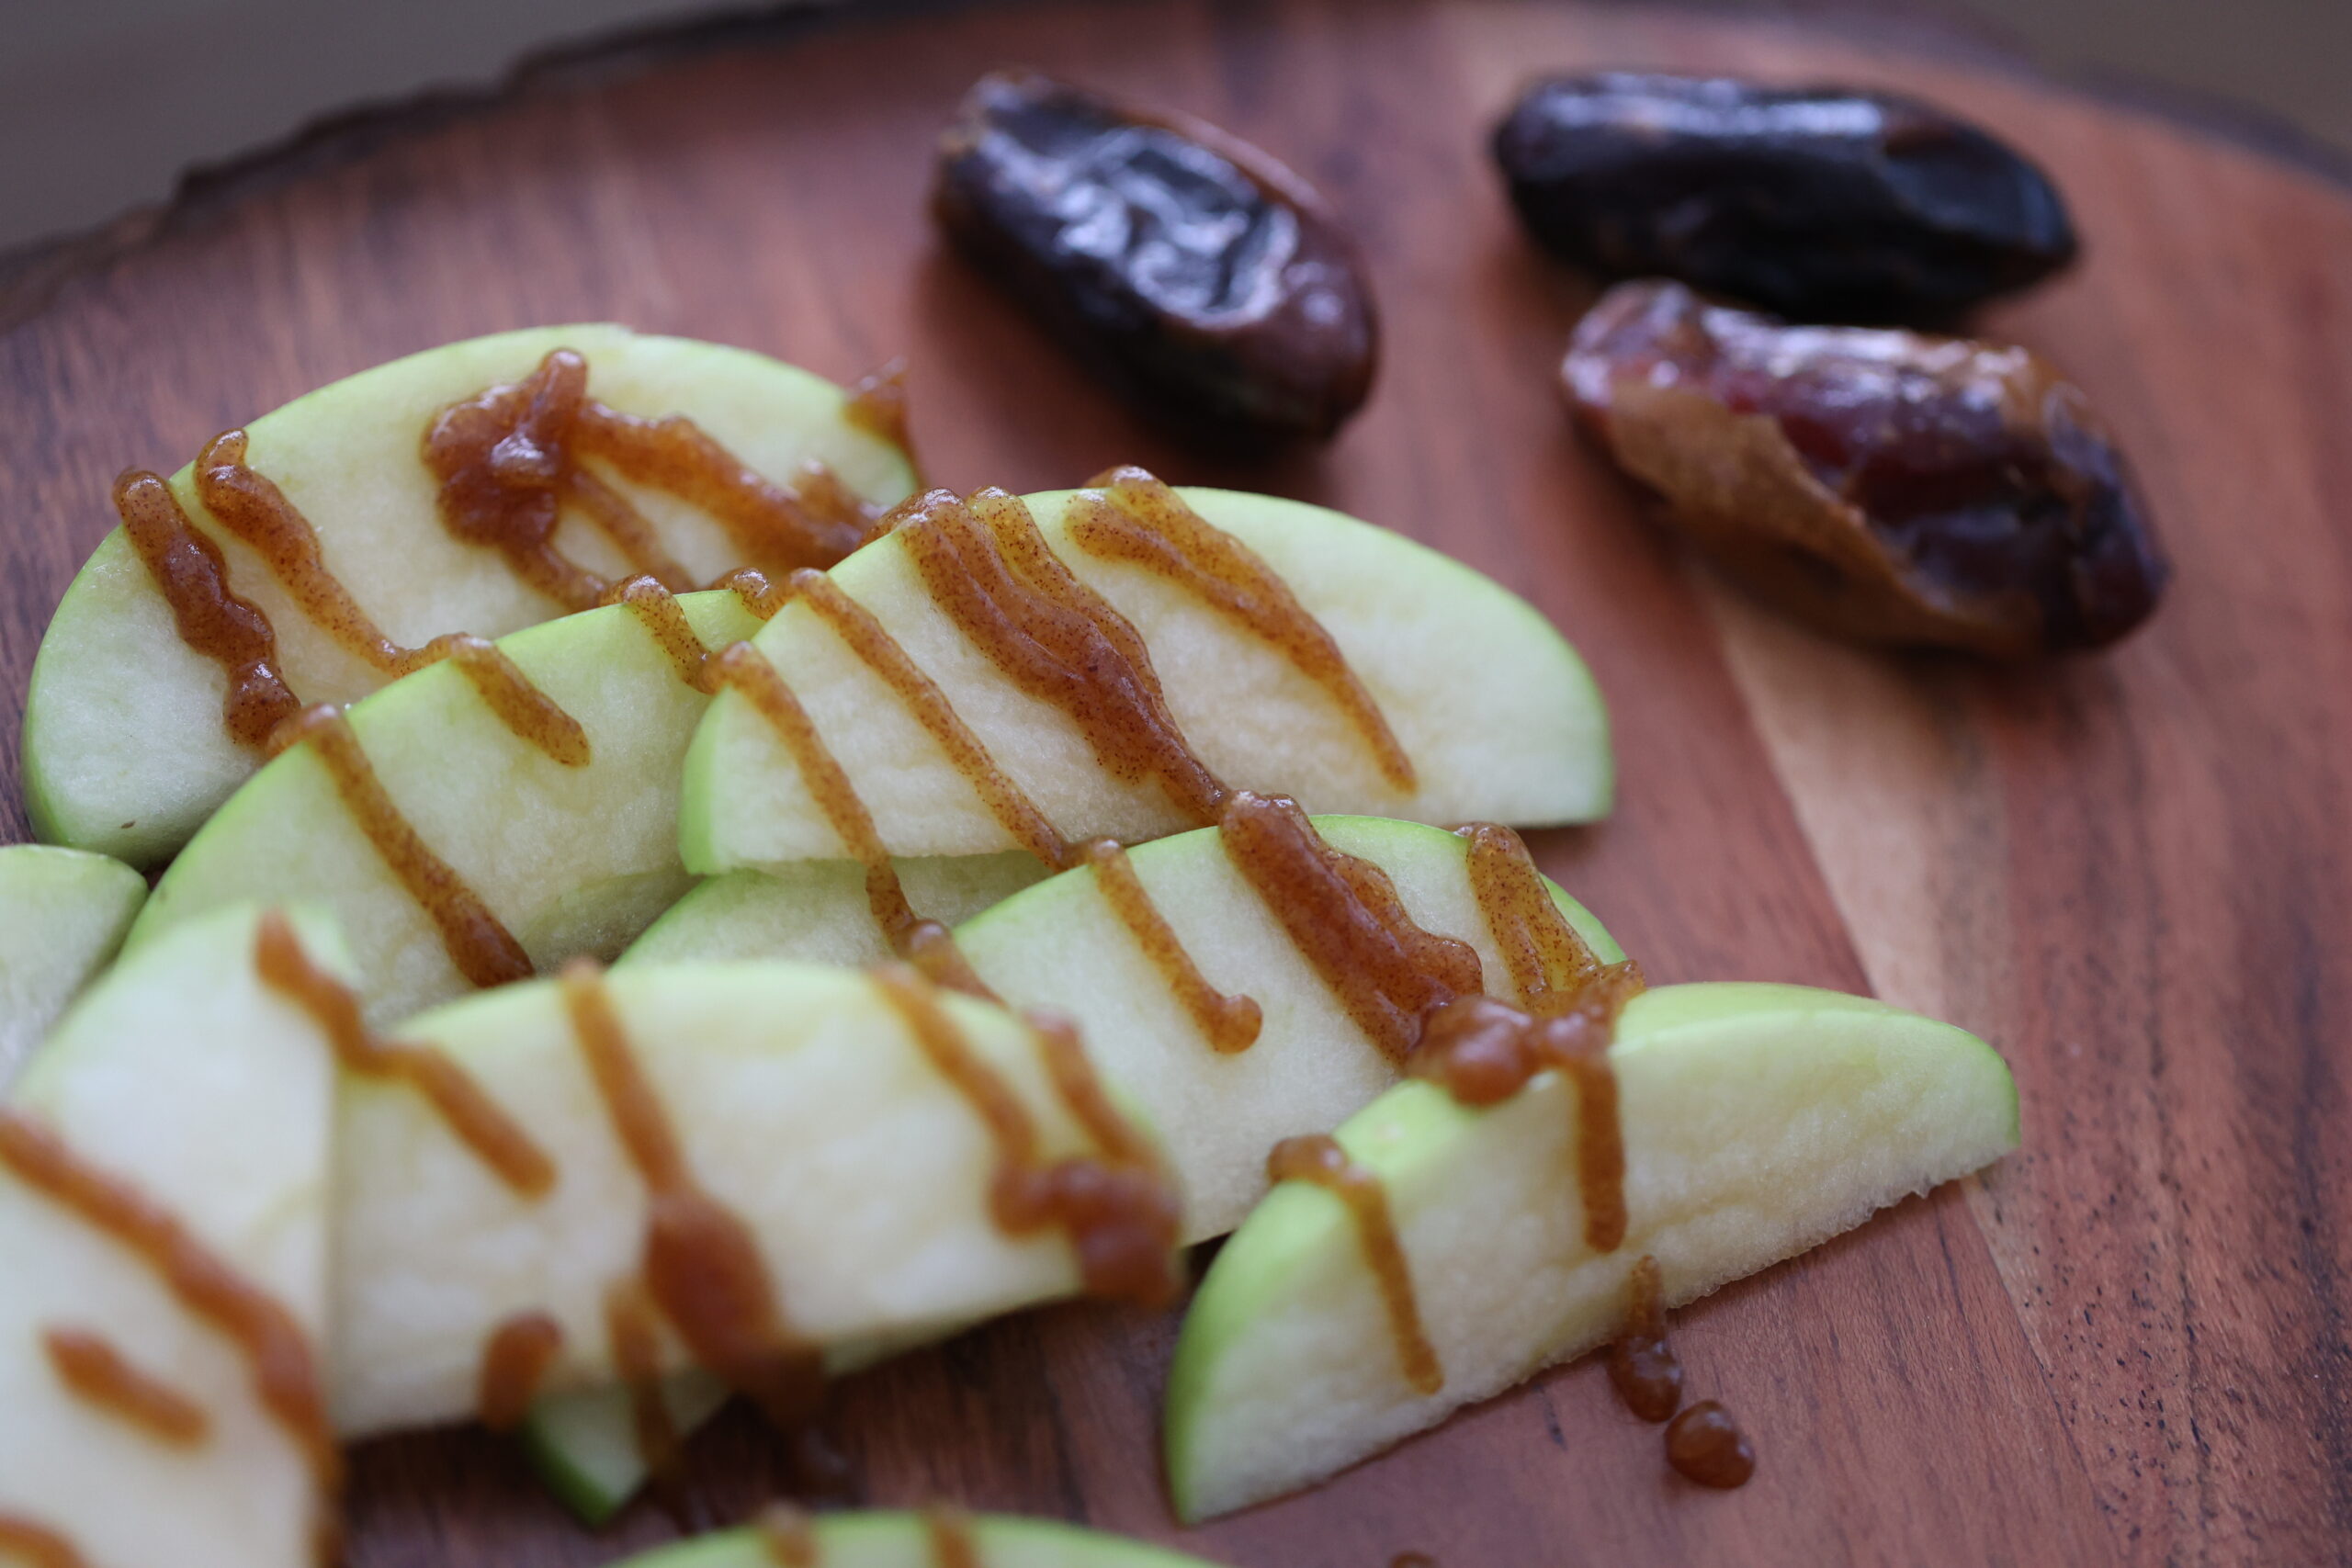 Date Paste on Apples